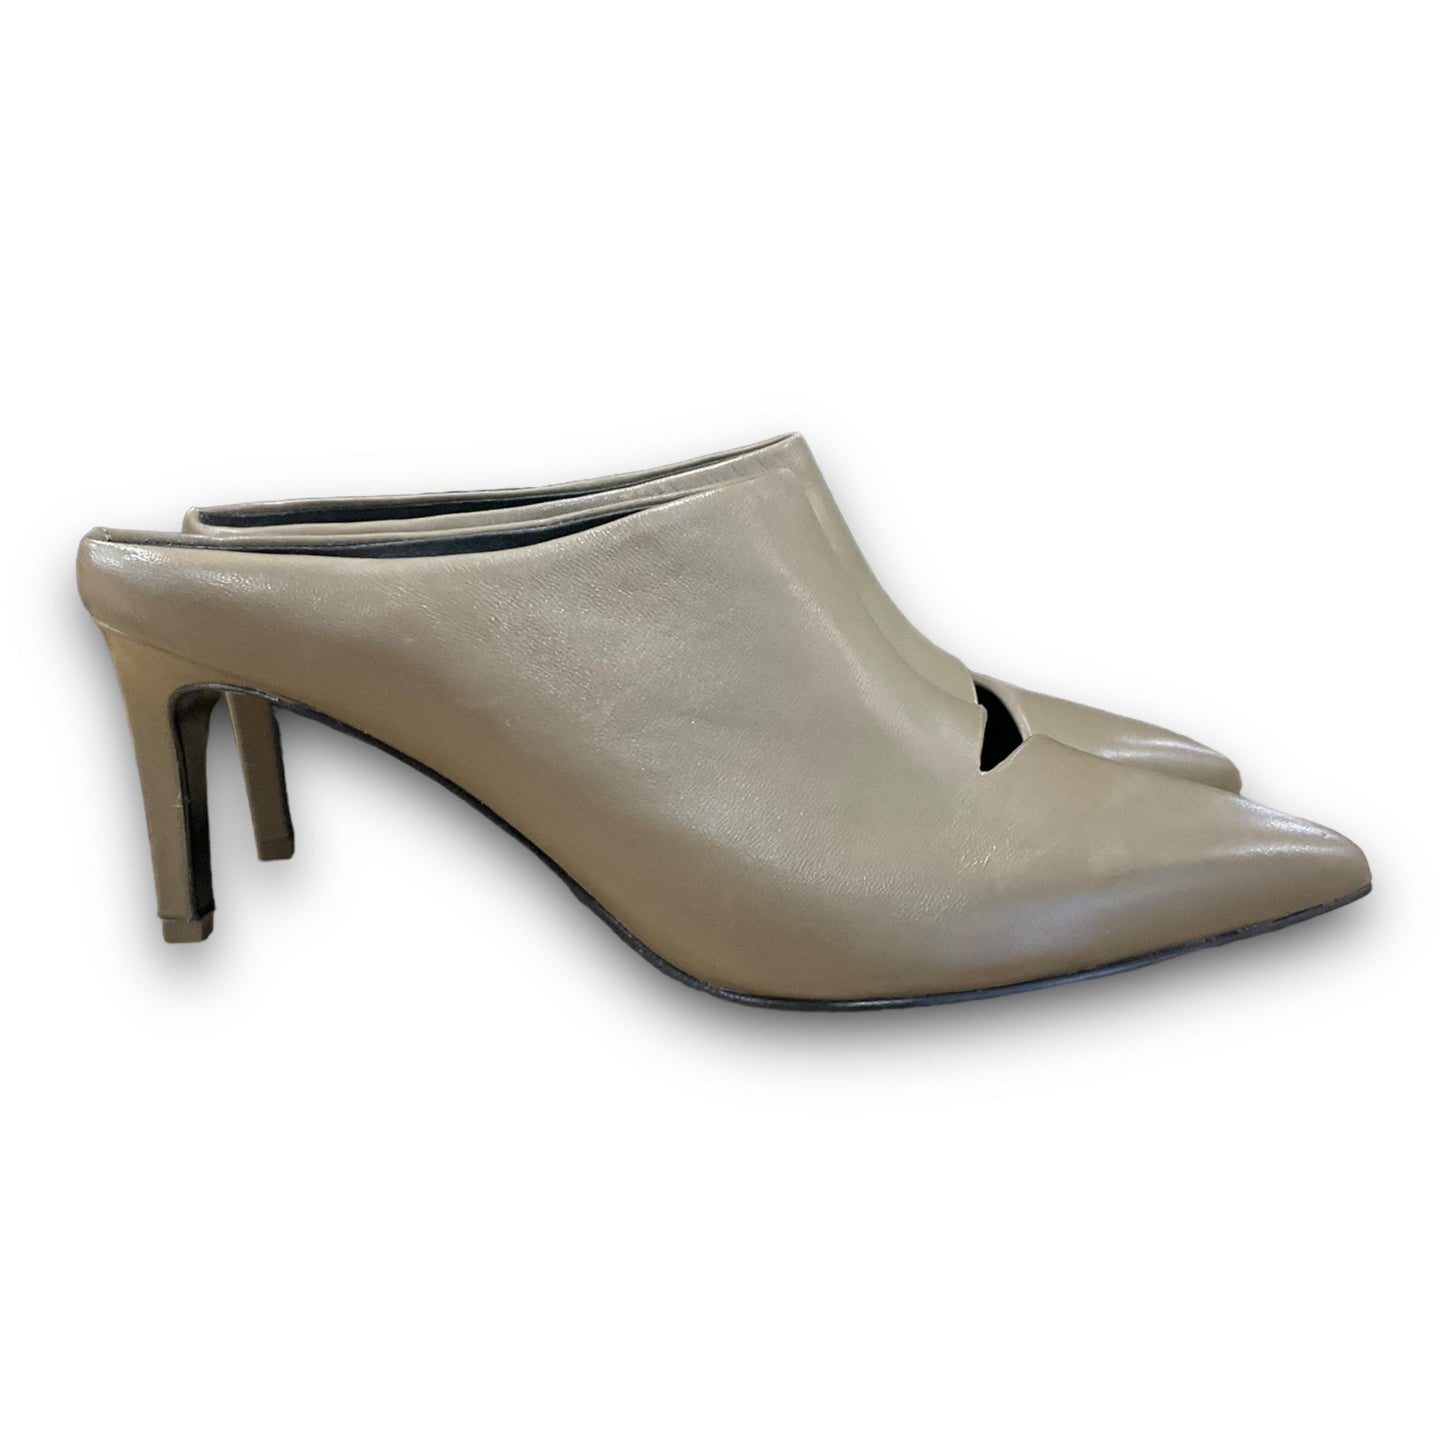 Green Shoes Heels Stiletto Rag And Bone, Size 8